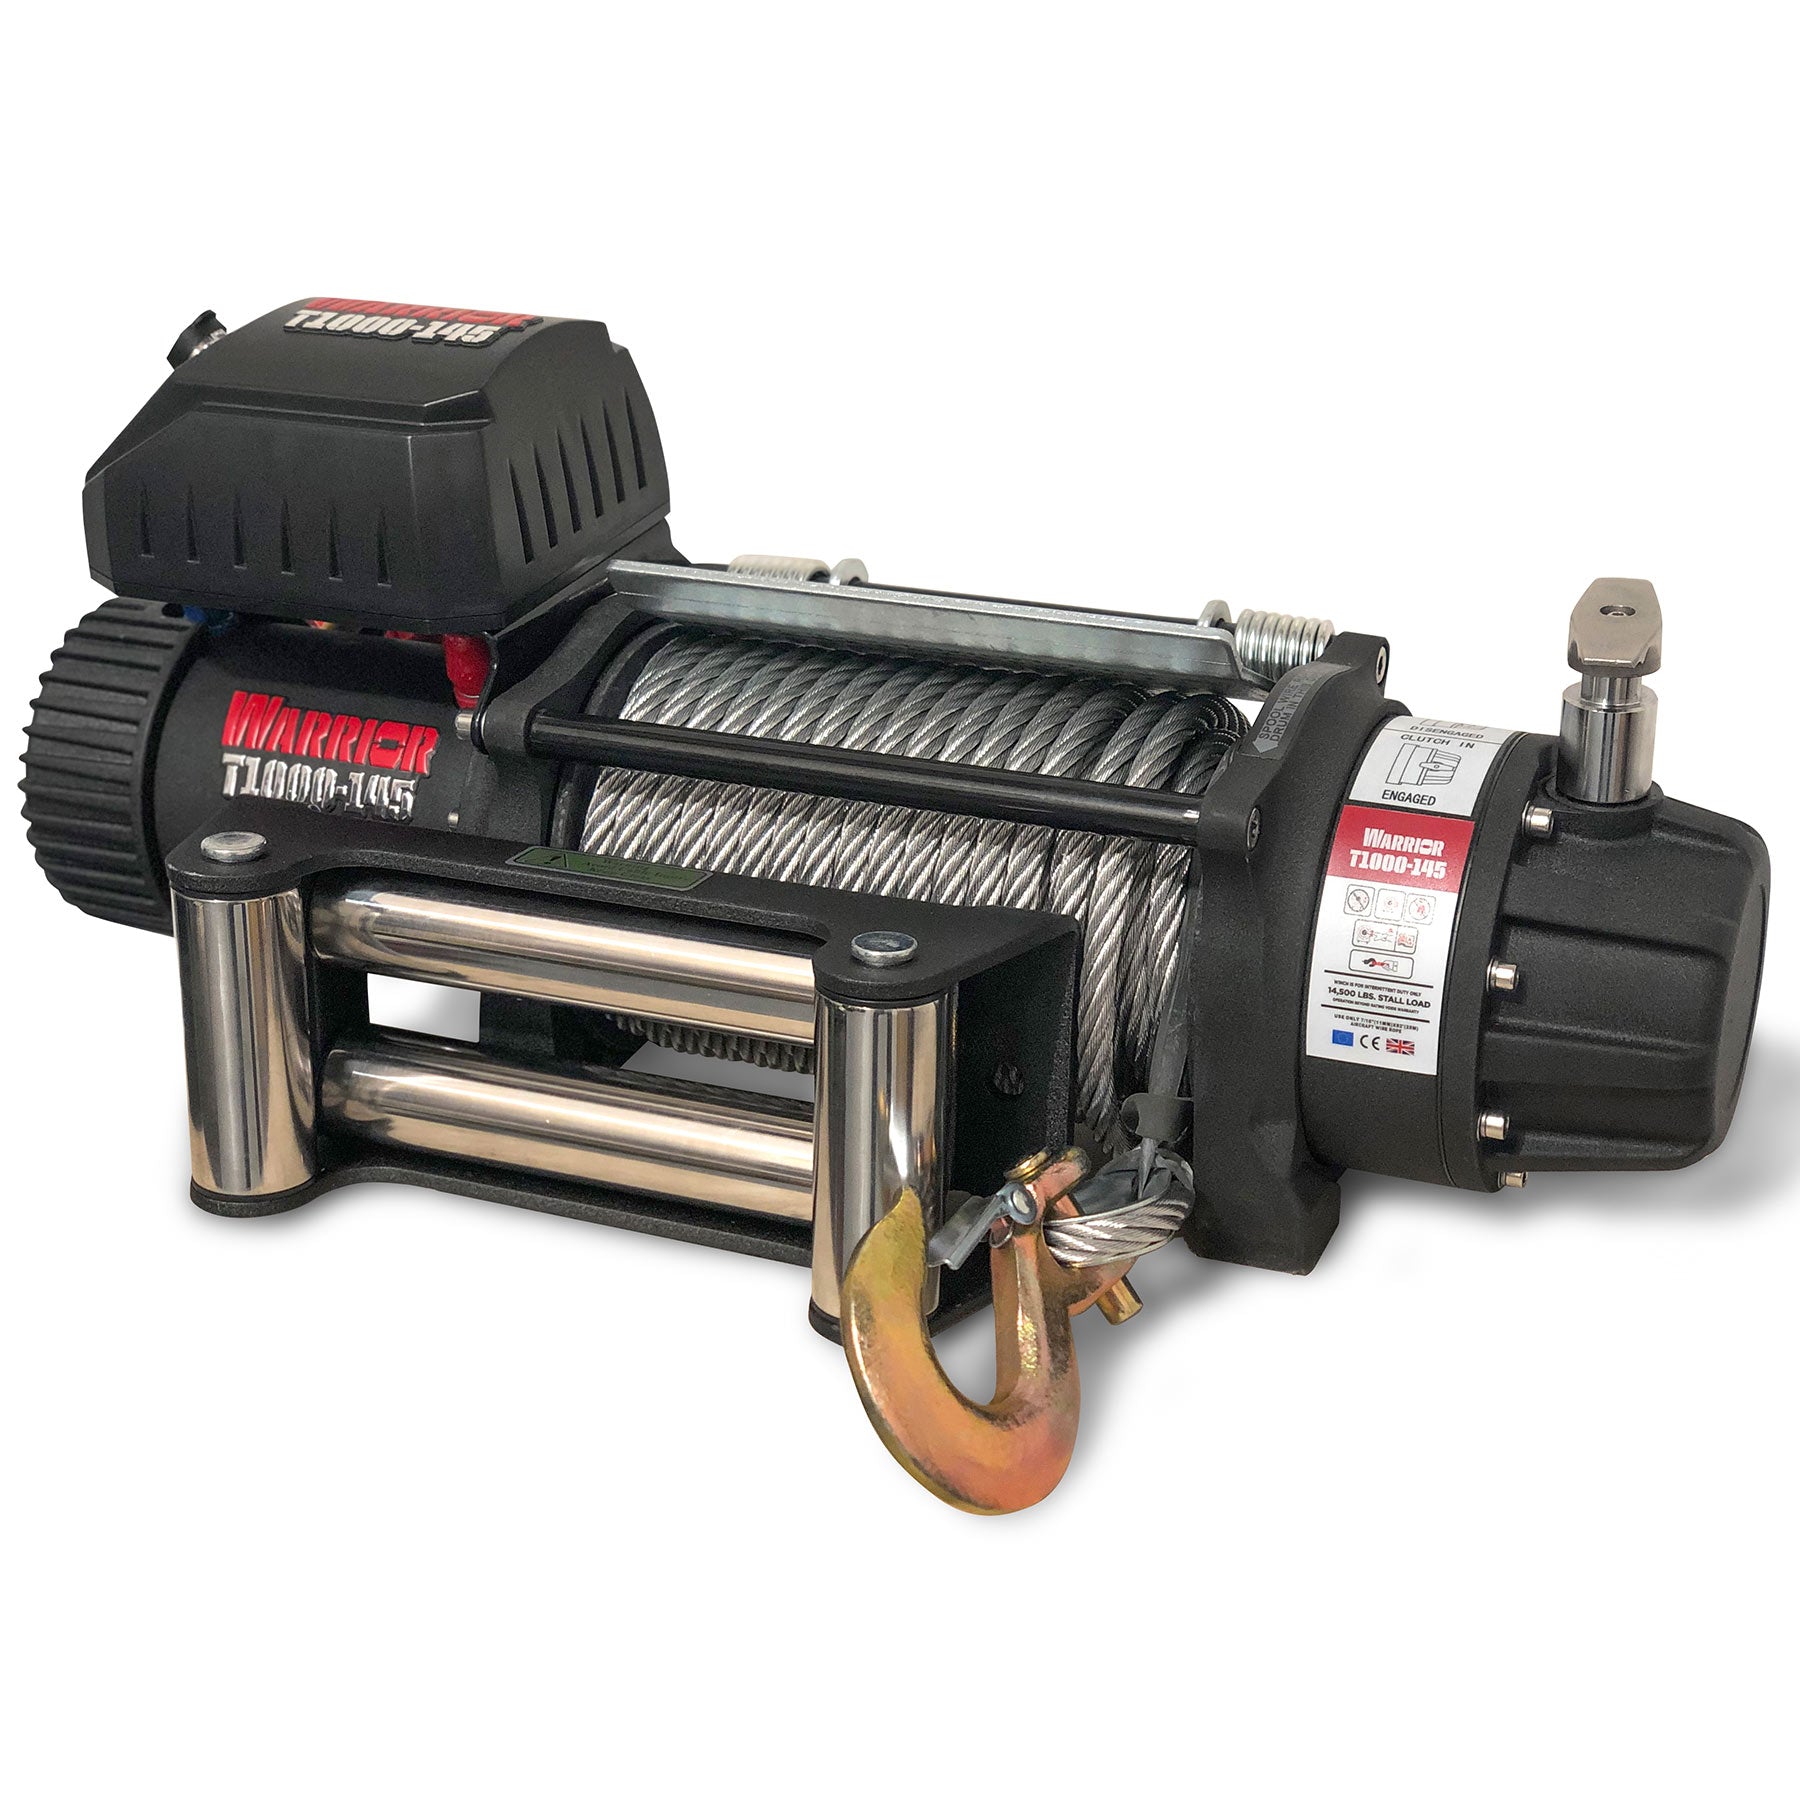 Warrior T1000-145 14500lb Severe Duty Winch overview